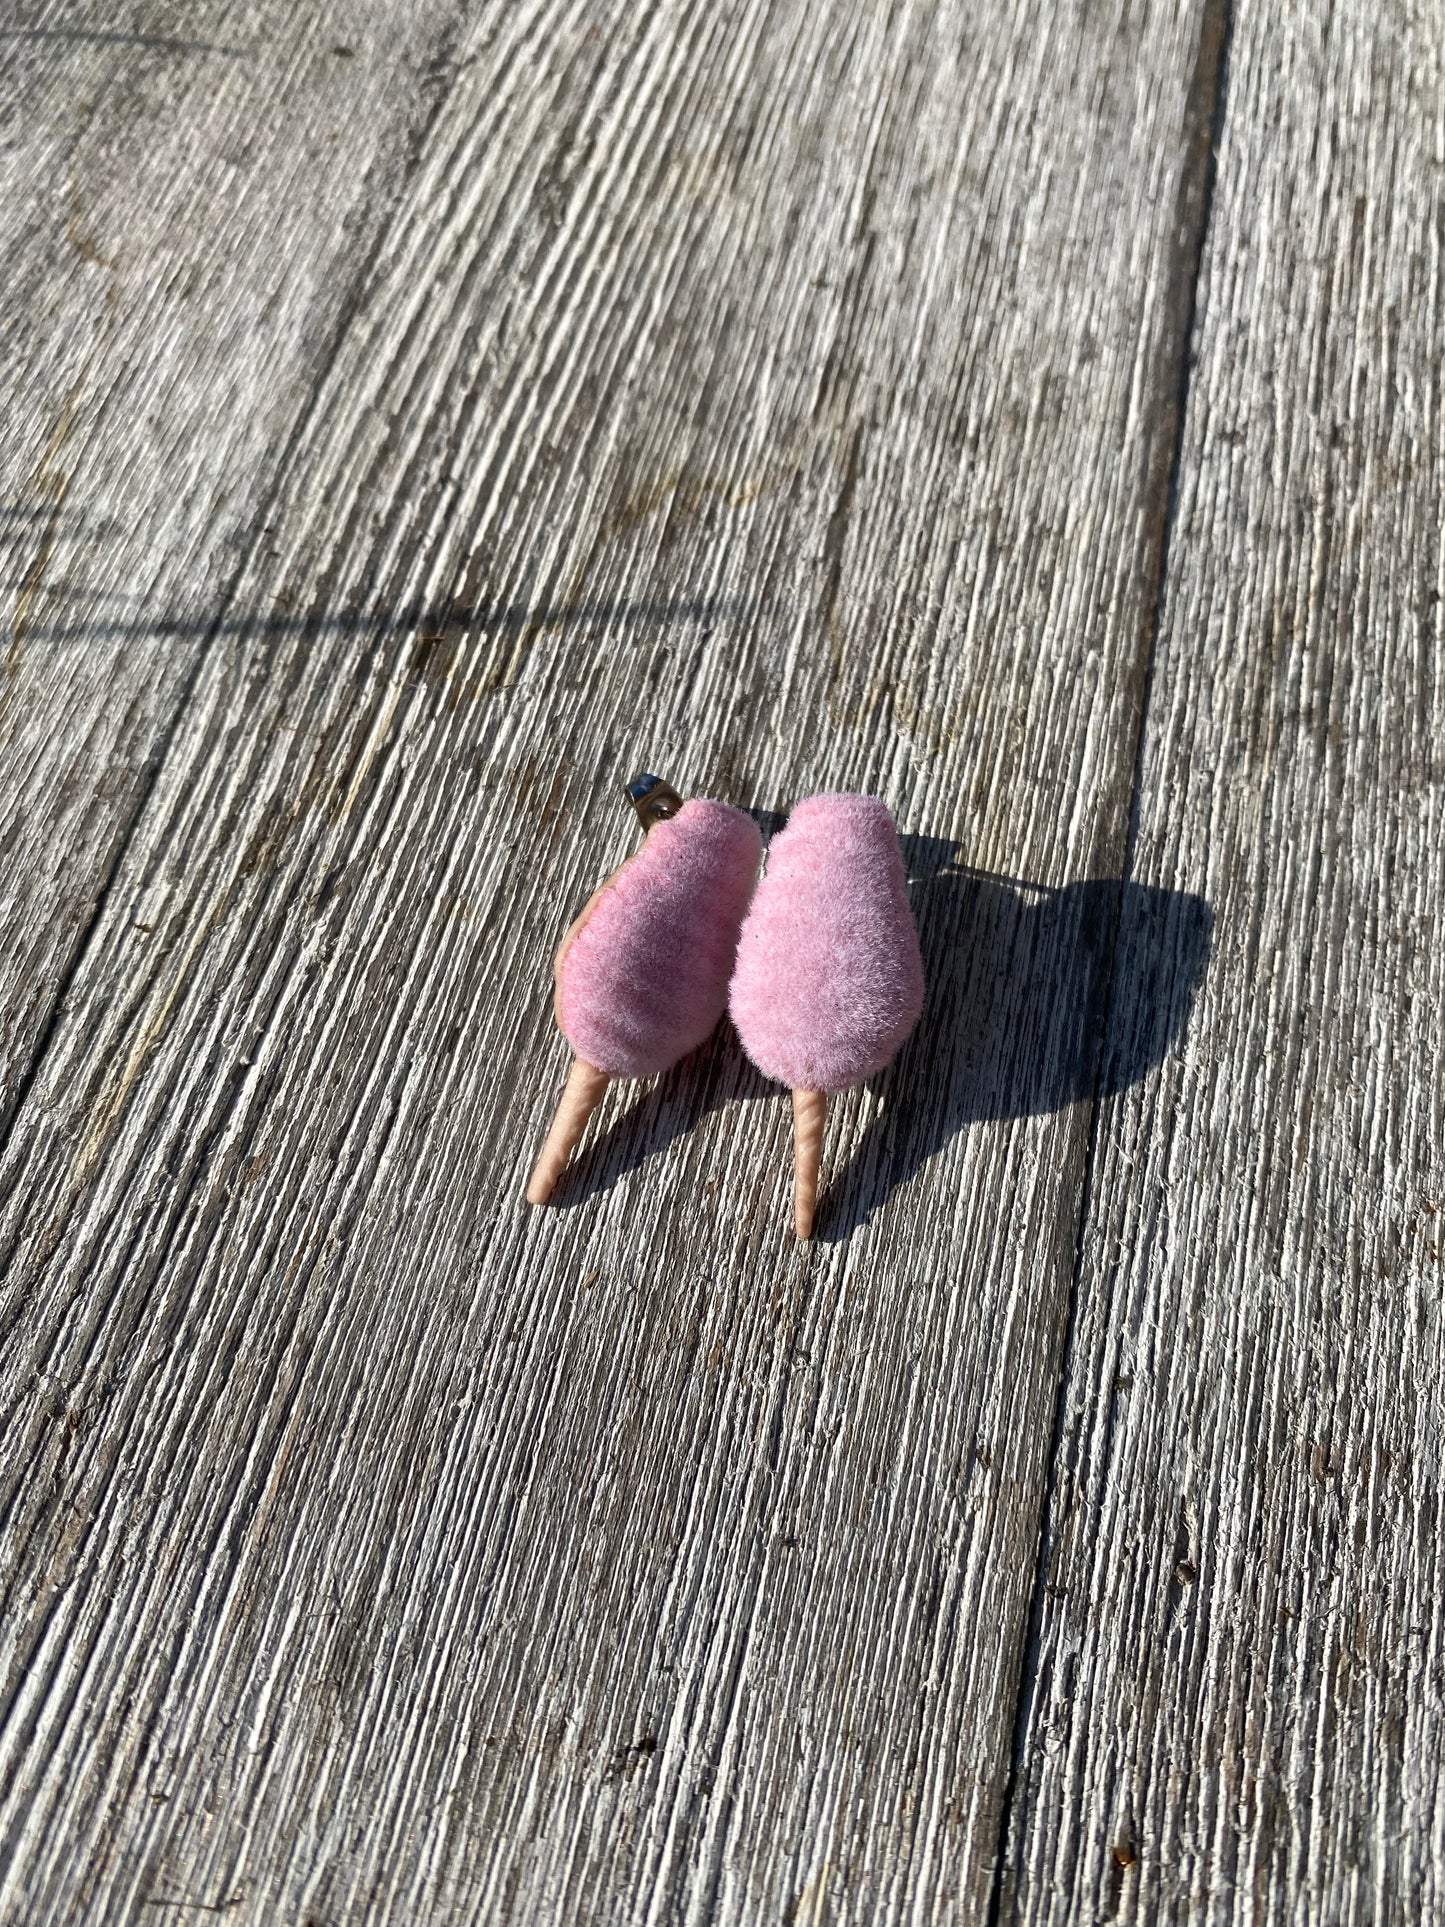 Cotton Candy Stud Earrings Gift